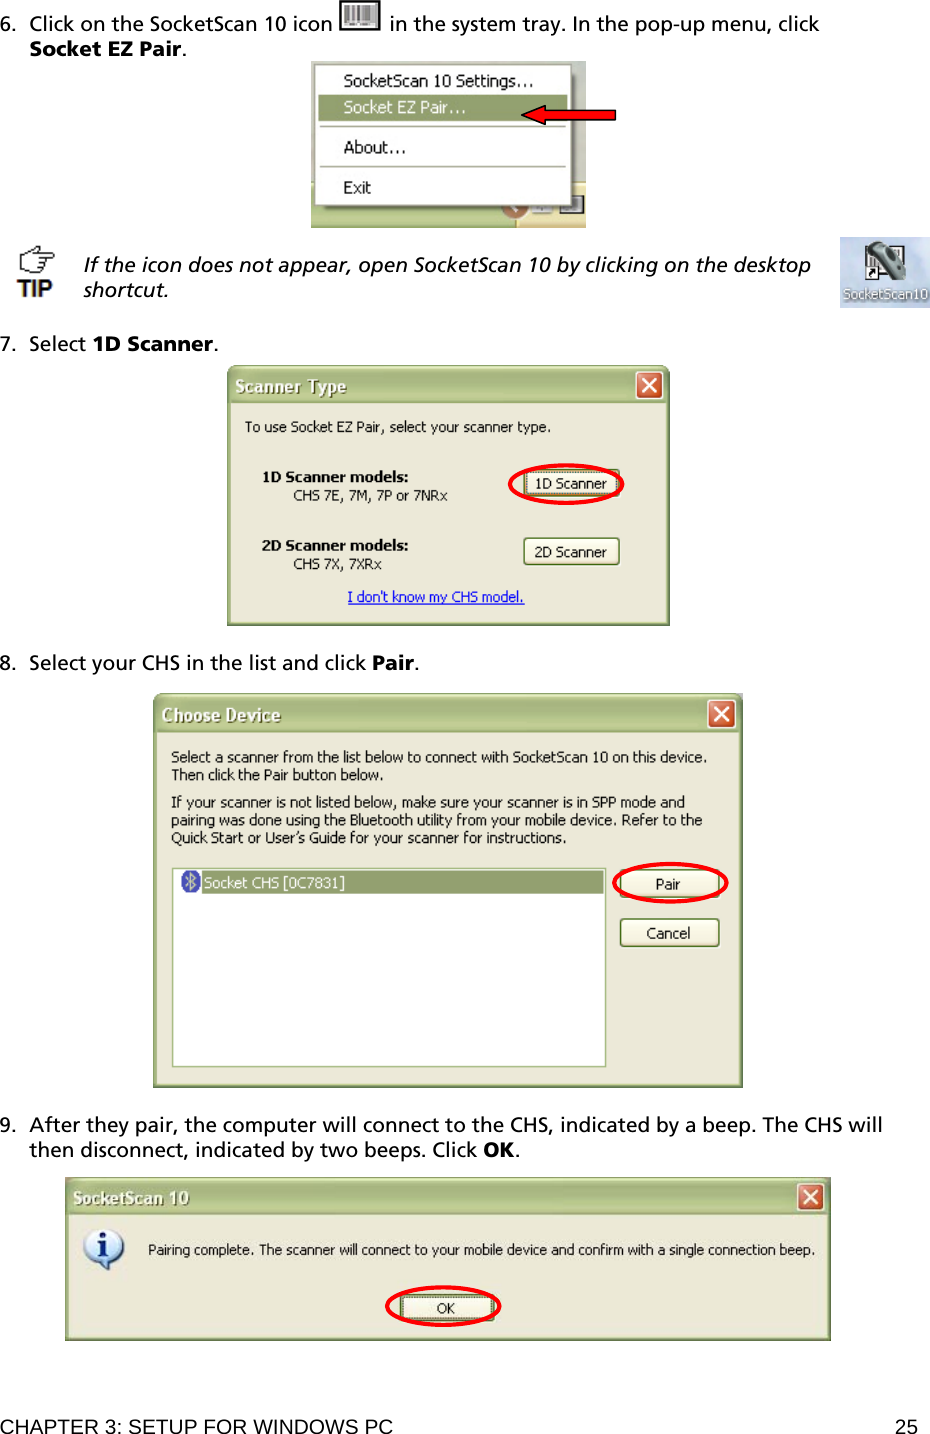 CHAPTER 3: SETUP FOR WINDOWS PC  25 6. Click on the SocketScan 10 icon   in the system tray. In the pop-up menu, click  Socket EZ Pair.   If the icon does not appear, open SocketScan 10 by clicking on the desktop shortcut.  7. Select 1D Scanner.    8. Select your CHS in the list and click Pair.     9. After they pair, the computer will connect to the CHS, indicated by a beep. The CHS will then disconnect, indicated by two beeps. Click OK.    